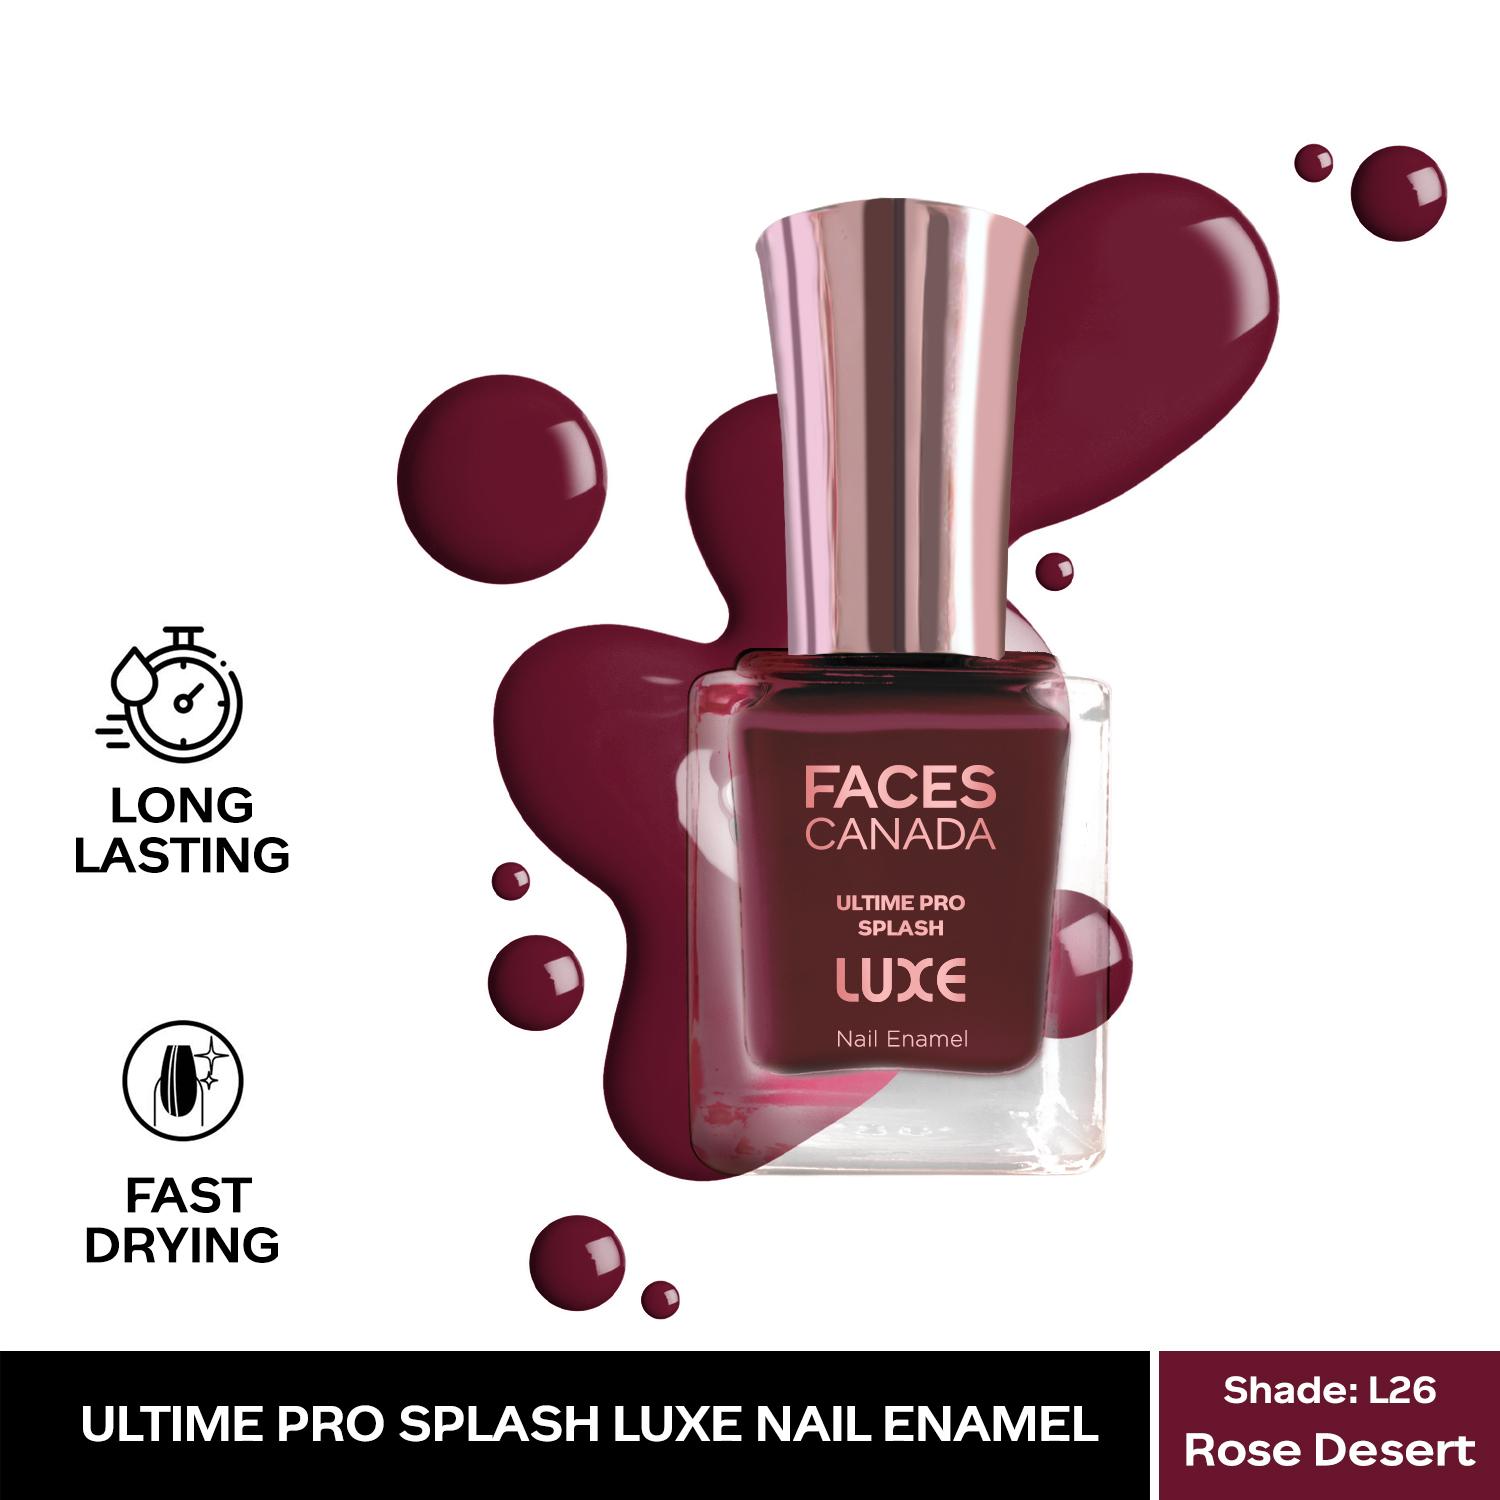 Faces Canada | Faces Canada Ultime Pro Splash Luxe Nail Enamel - Rose Desert (L26), Glossy Finish (12 ml)